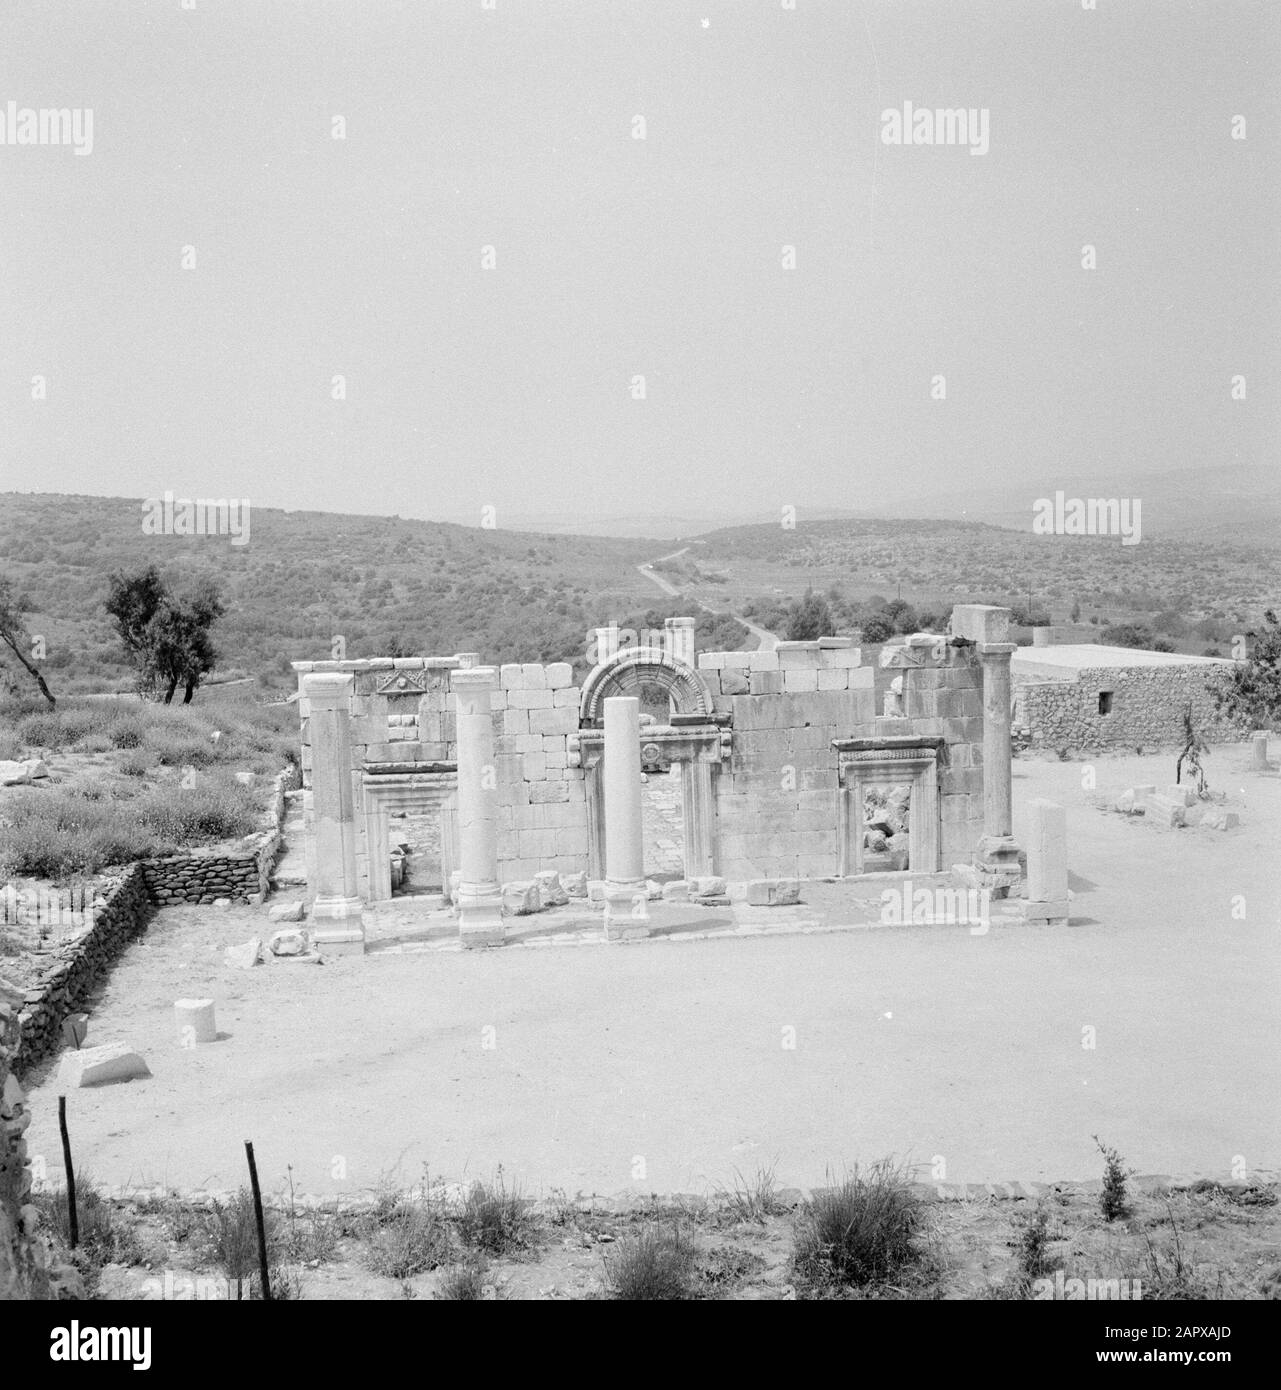 Israel 1964-1965: Bar'am, ruin synagogue  Ruins of the ancient synagogue in Kfar Bar'am Annotation: Bar'am is a kibbutz in northern Israel, located about 300 meters from the border with Lebanon. Bar'am National Park is known for the remains of one of Israel's oldest synagogues Date: 1964 Location: Bar'am, Israel Keywords: archeology, sculptures, ruins, synagogues Stock Photo